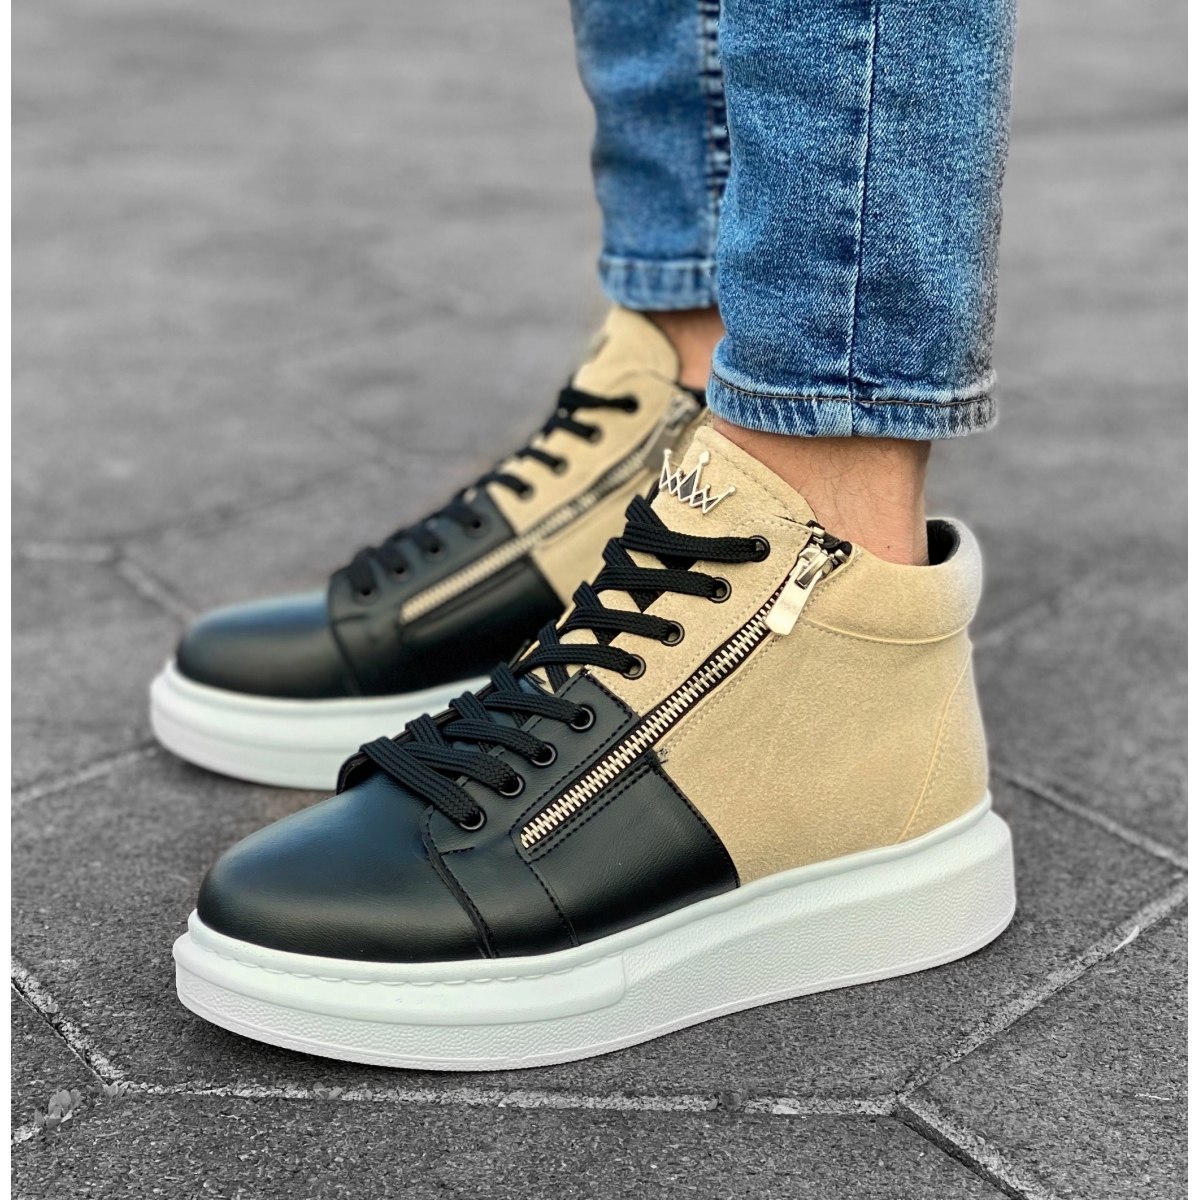 Hype Sole Zipped Style High Top Sneakers in Cream-Black | Martin Valen